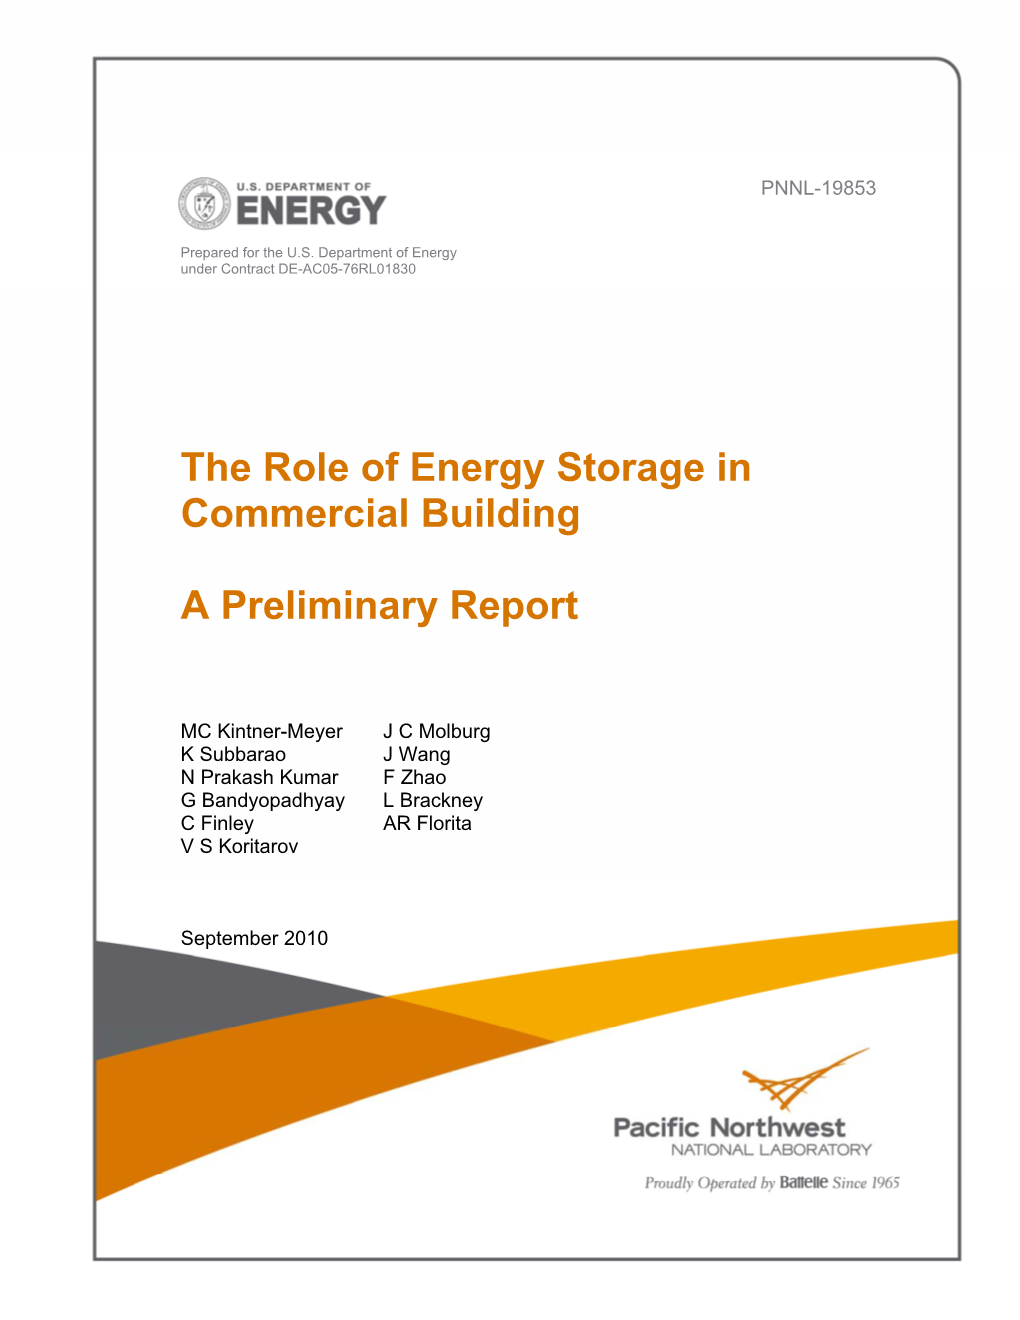 Energy Storage in Commercial Building